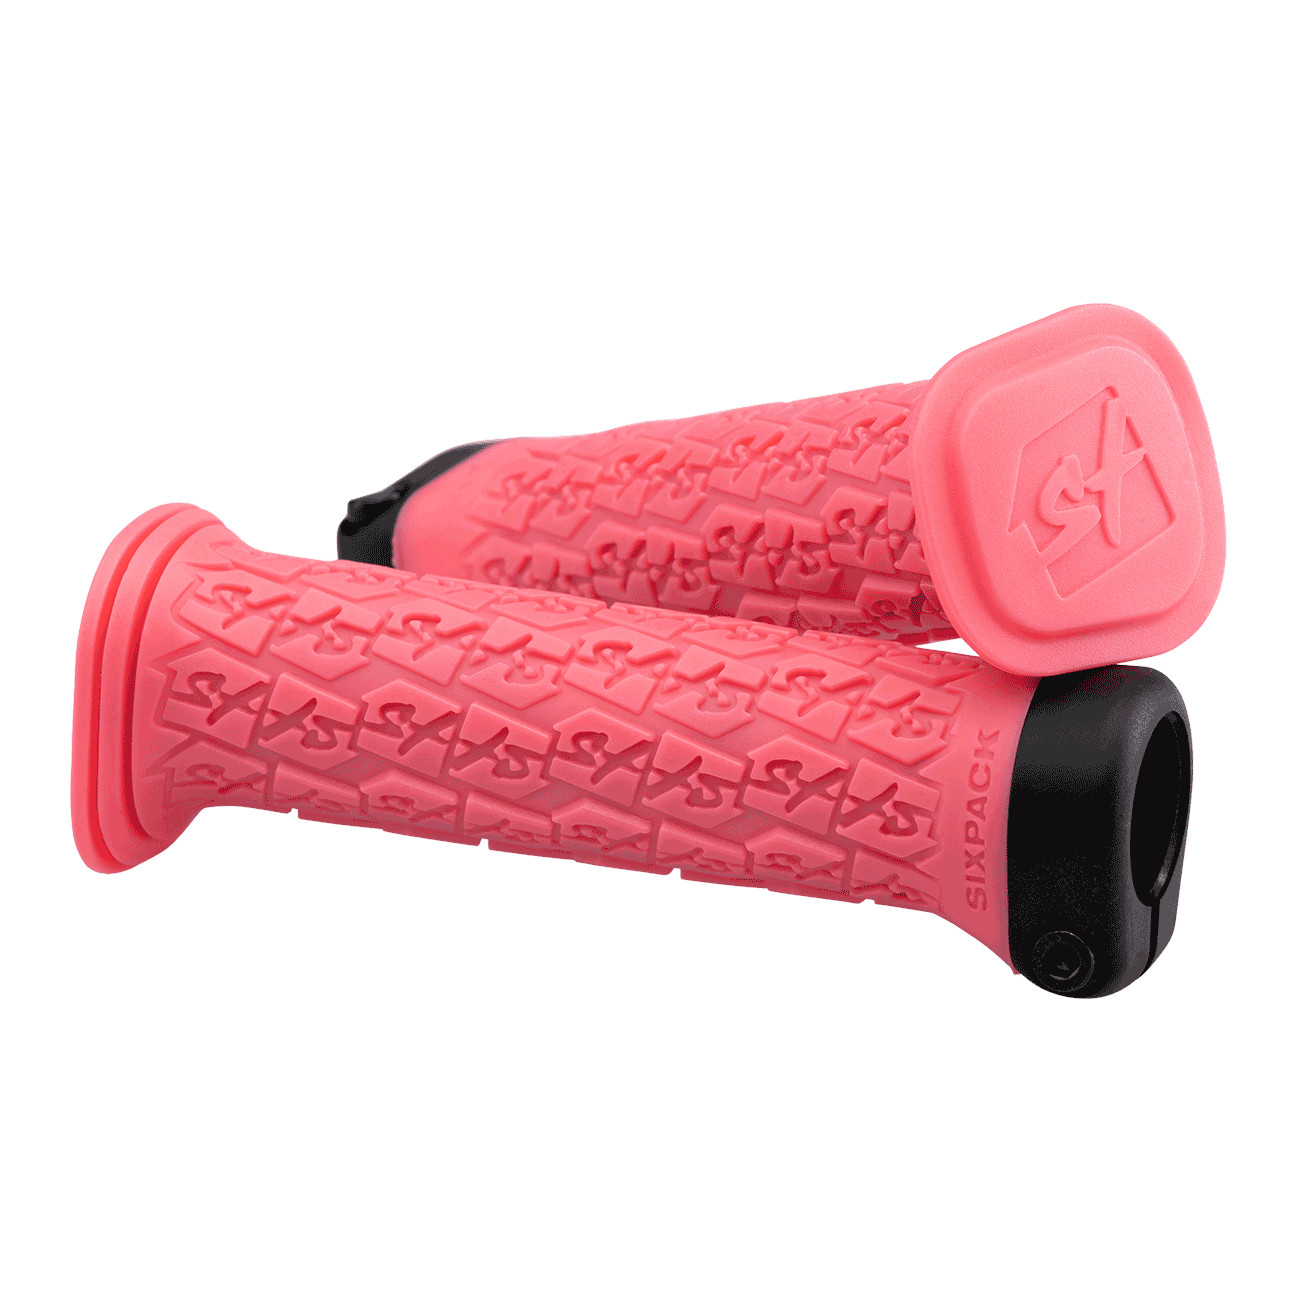 Picture of Sixpack 1st Ride Handlebar Grips - Raspberry pink